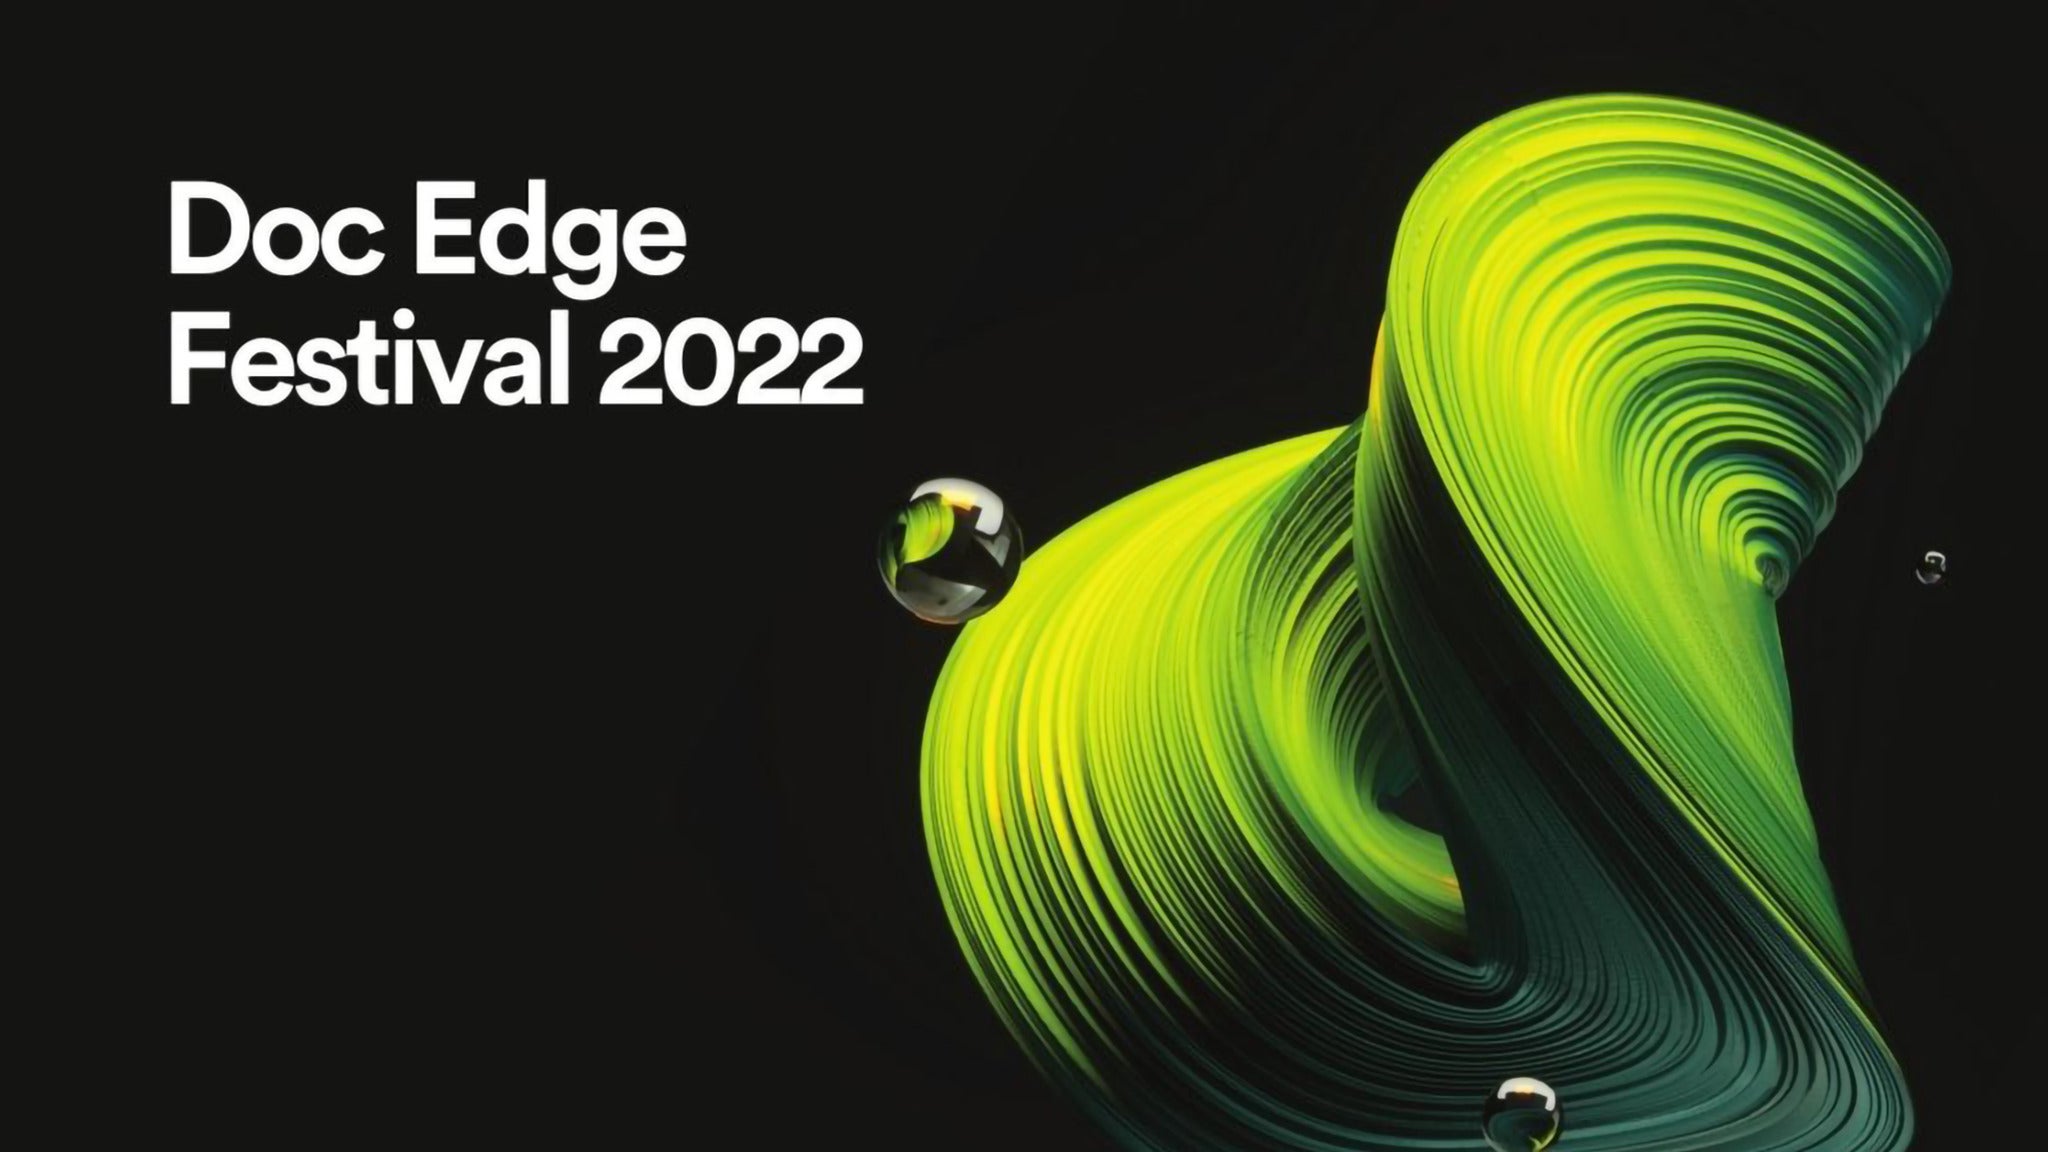 Image used with permission from Ticketmaster | Doc Edge Film Festival 2022: Take 5 Film Pass tickets